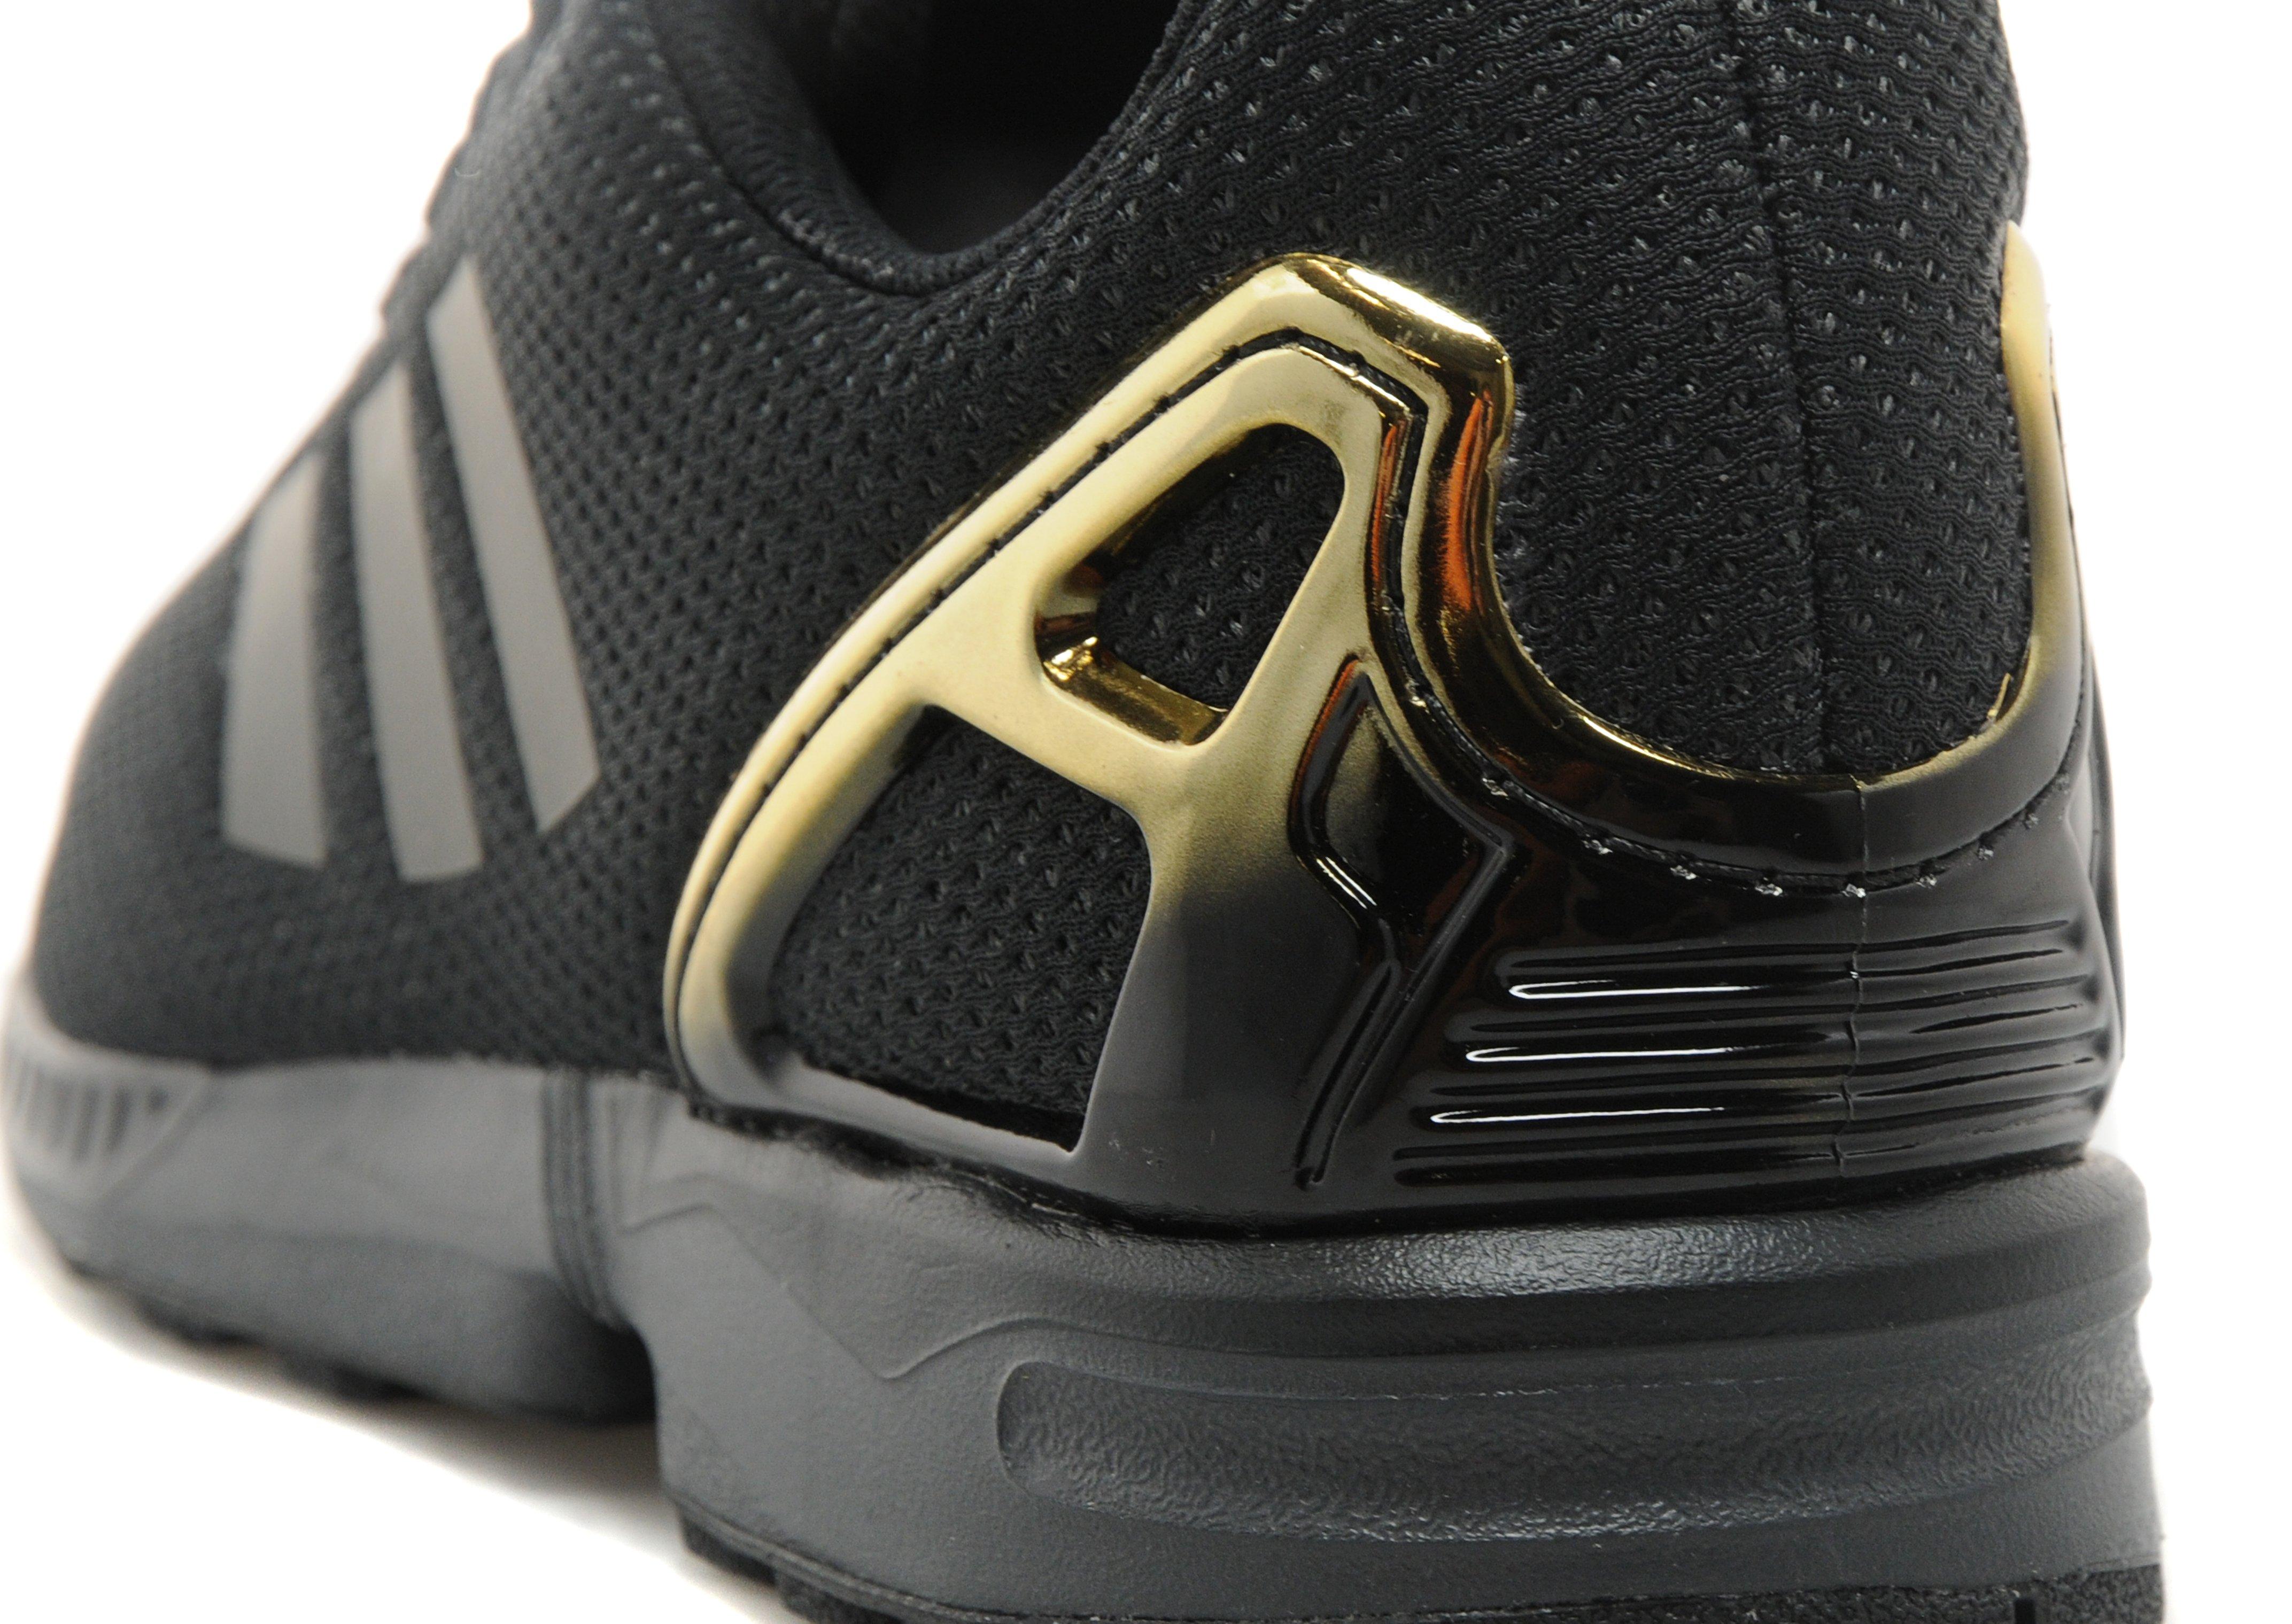 zx flux black and gold